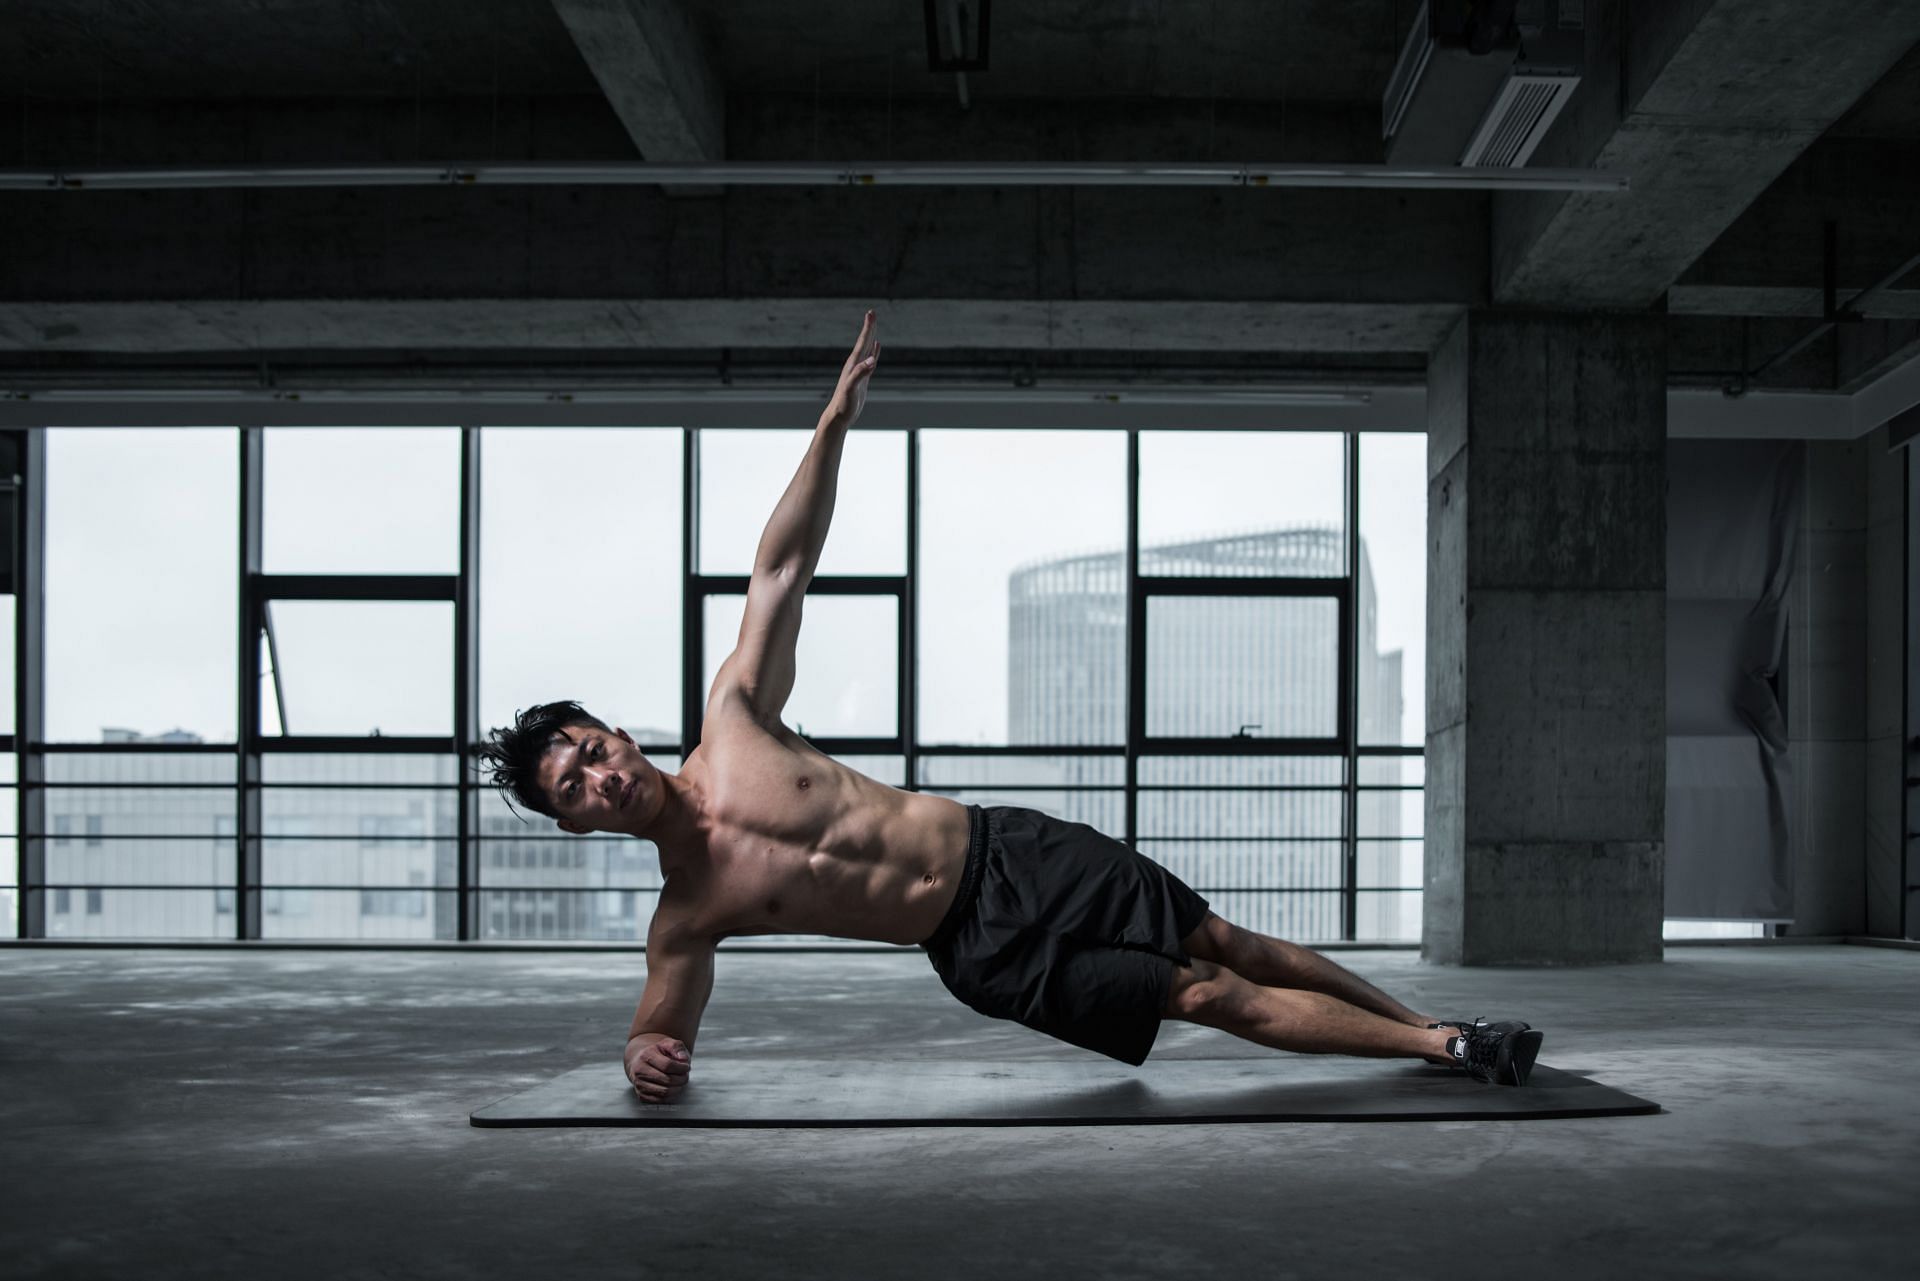 Muscular endurance is as important as building the physique while working out. (Image by Li Sun / Pexels)